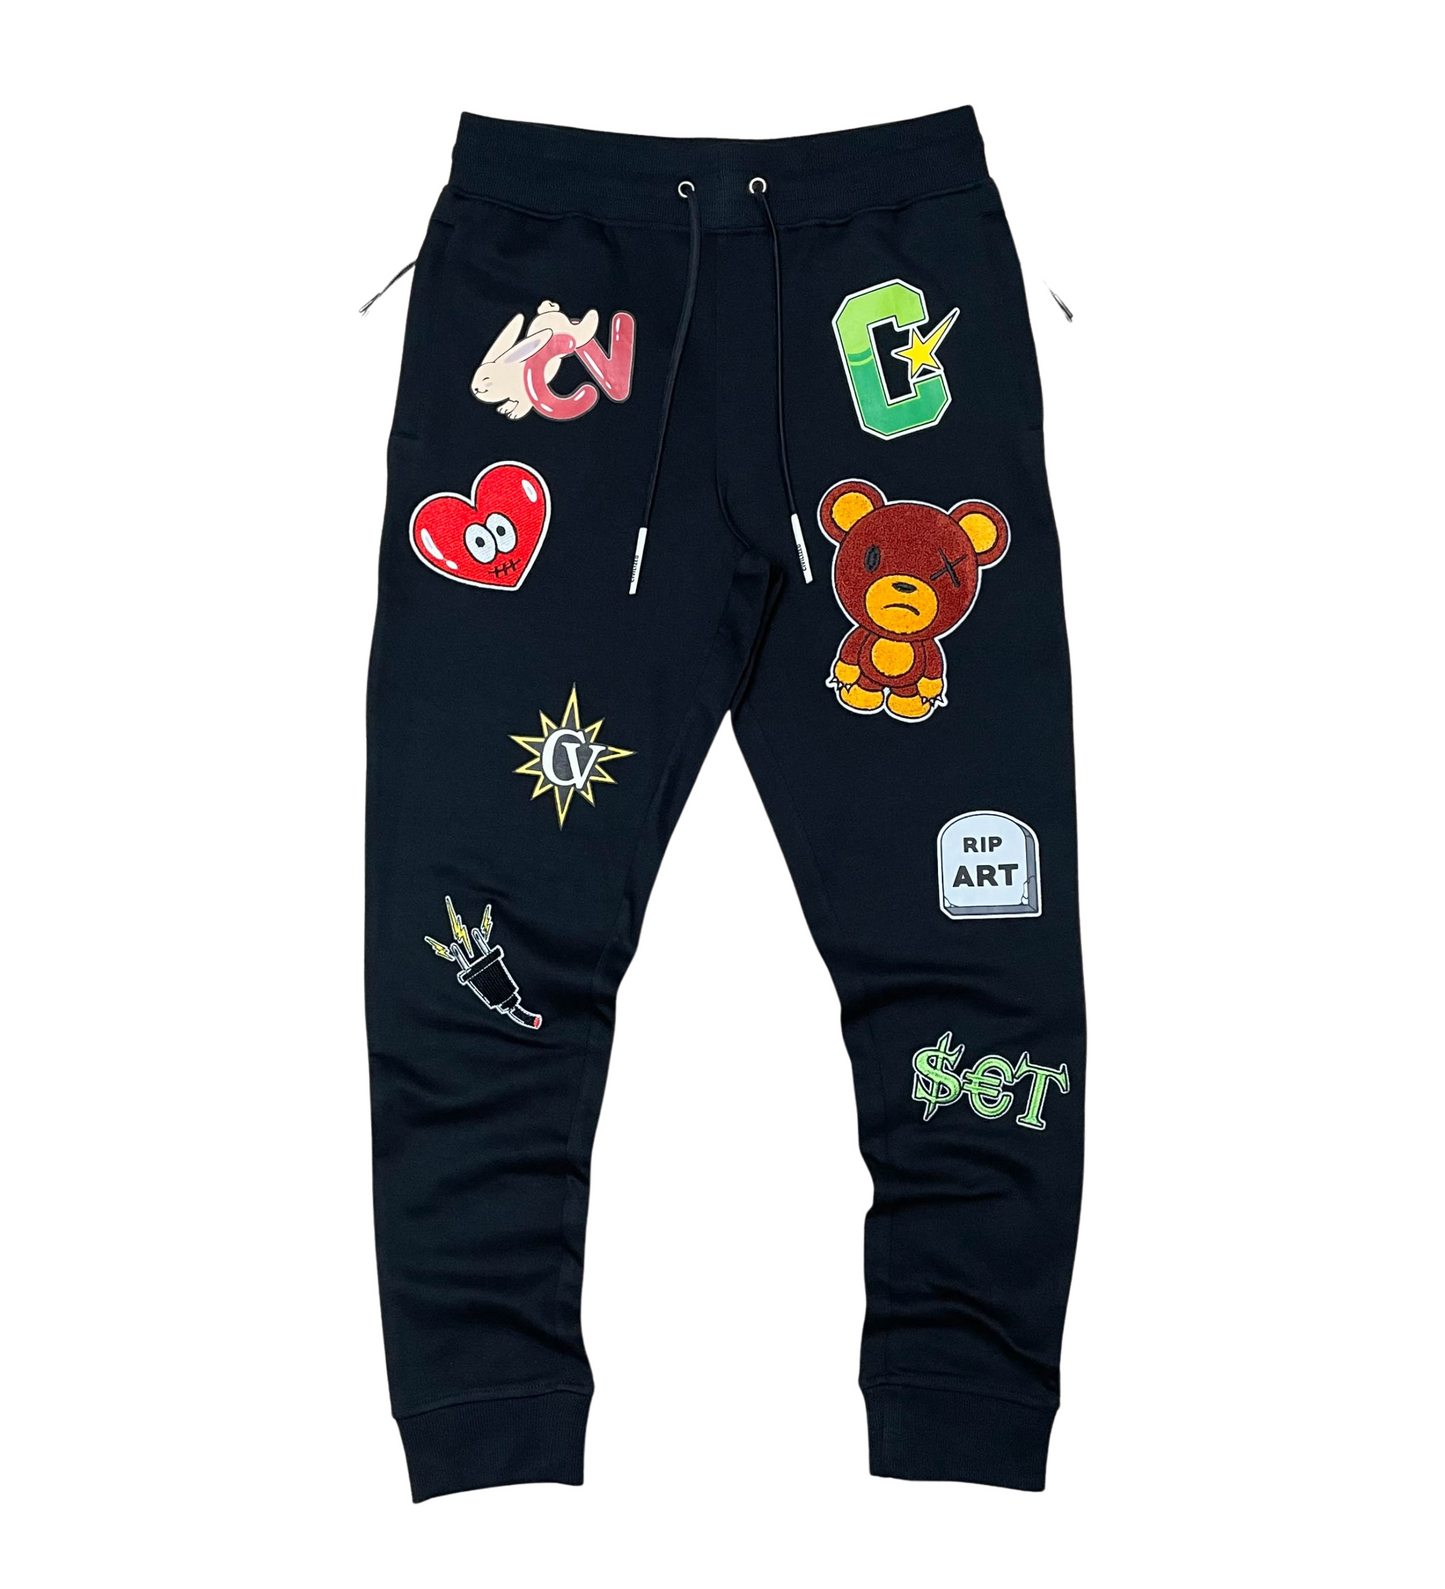 Multi Patch & Embroidery Jogger Set